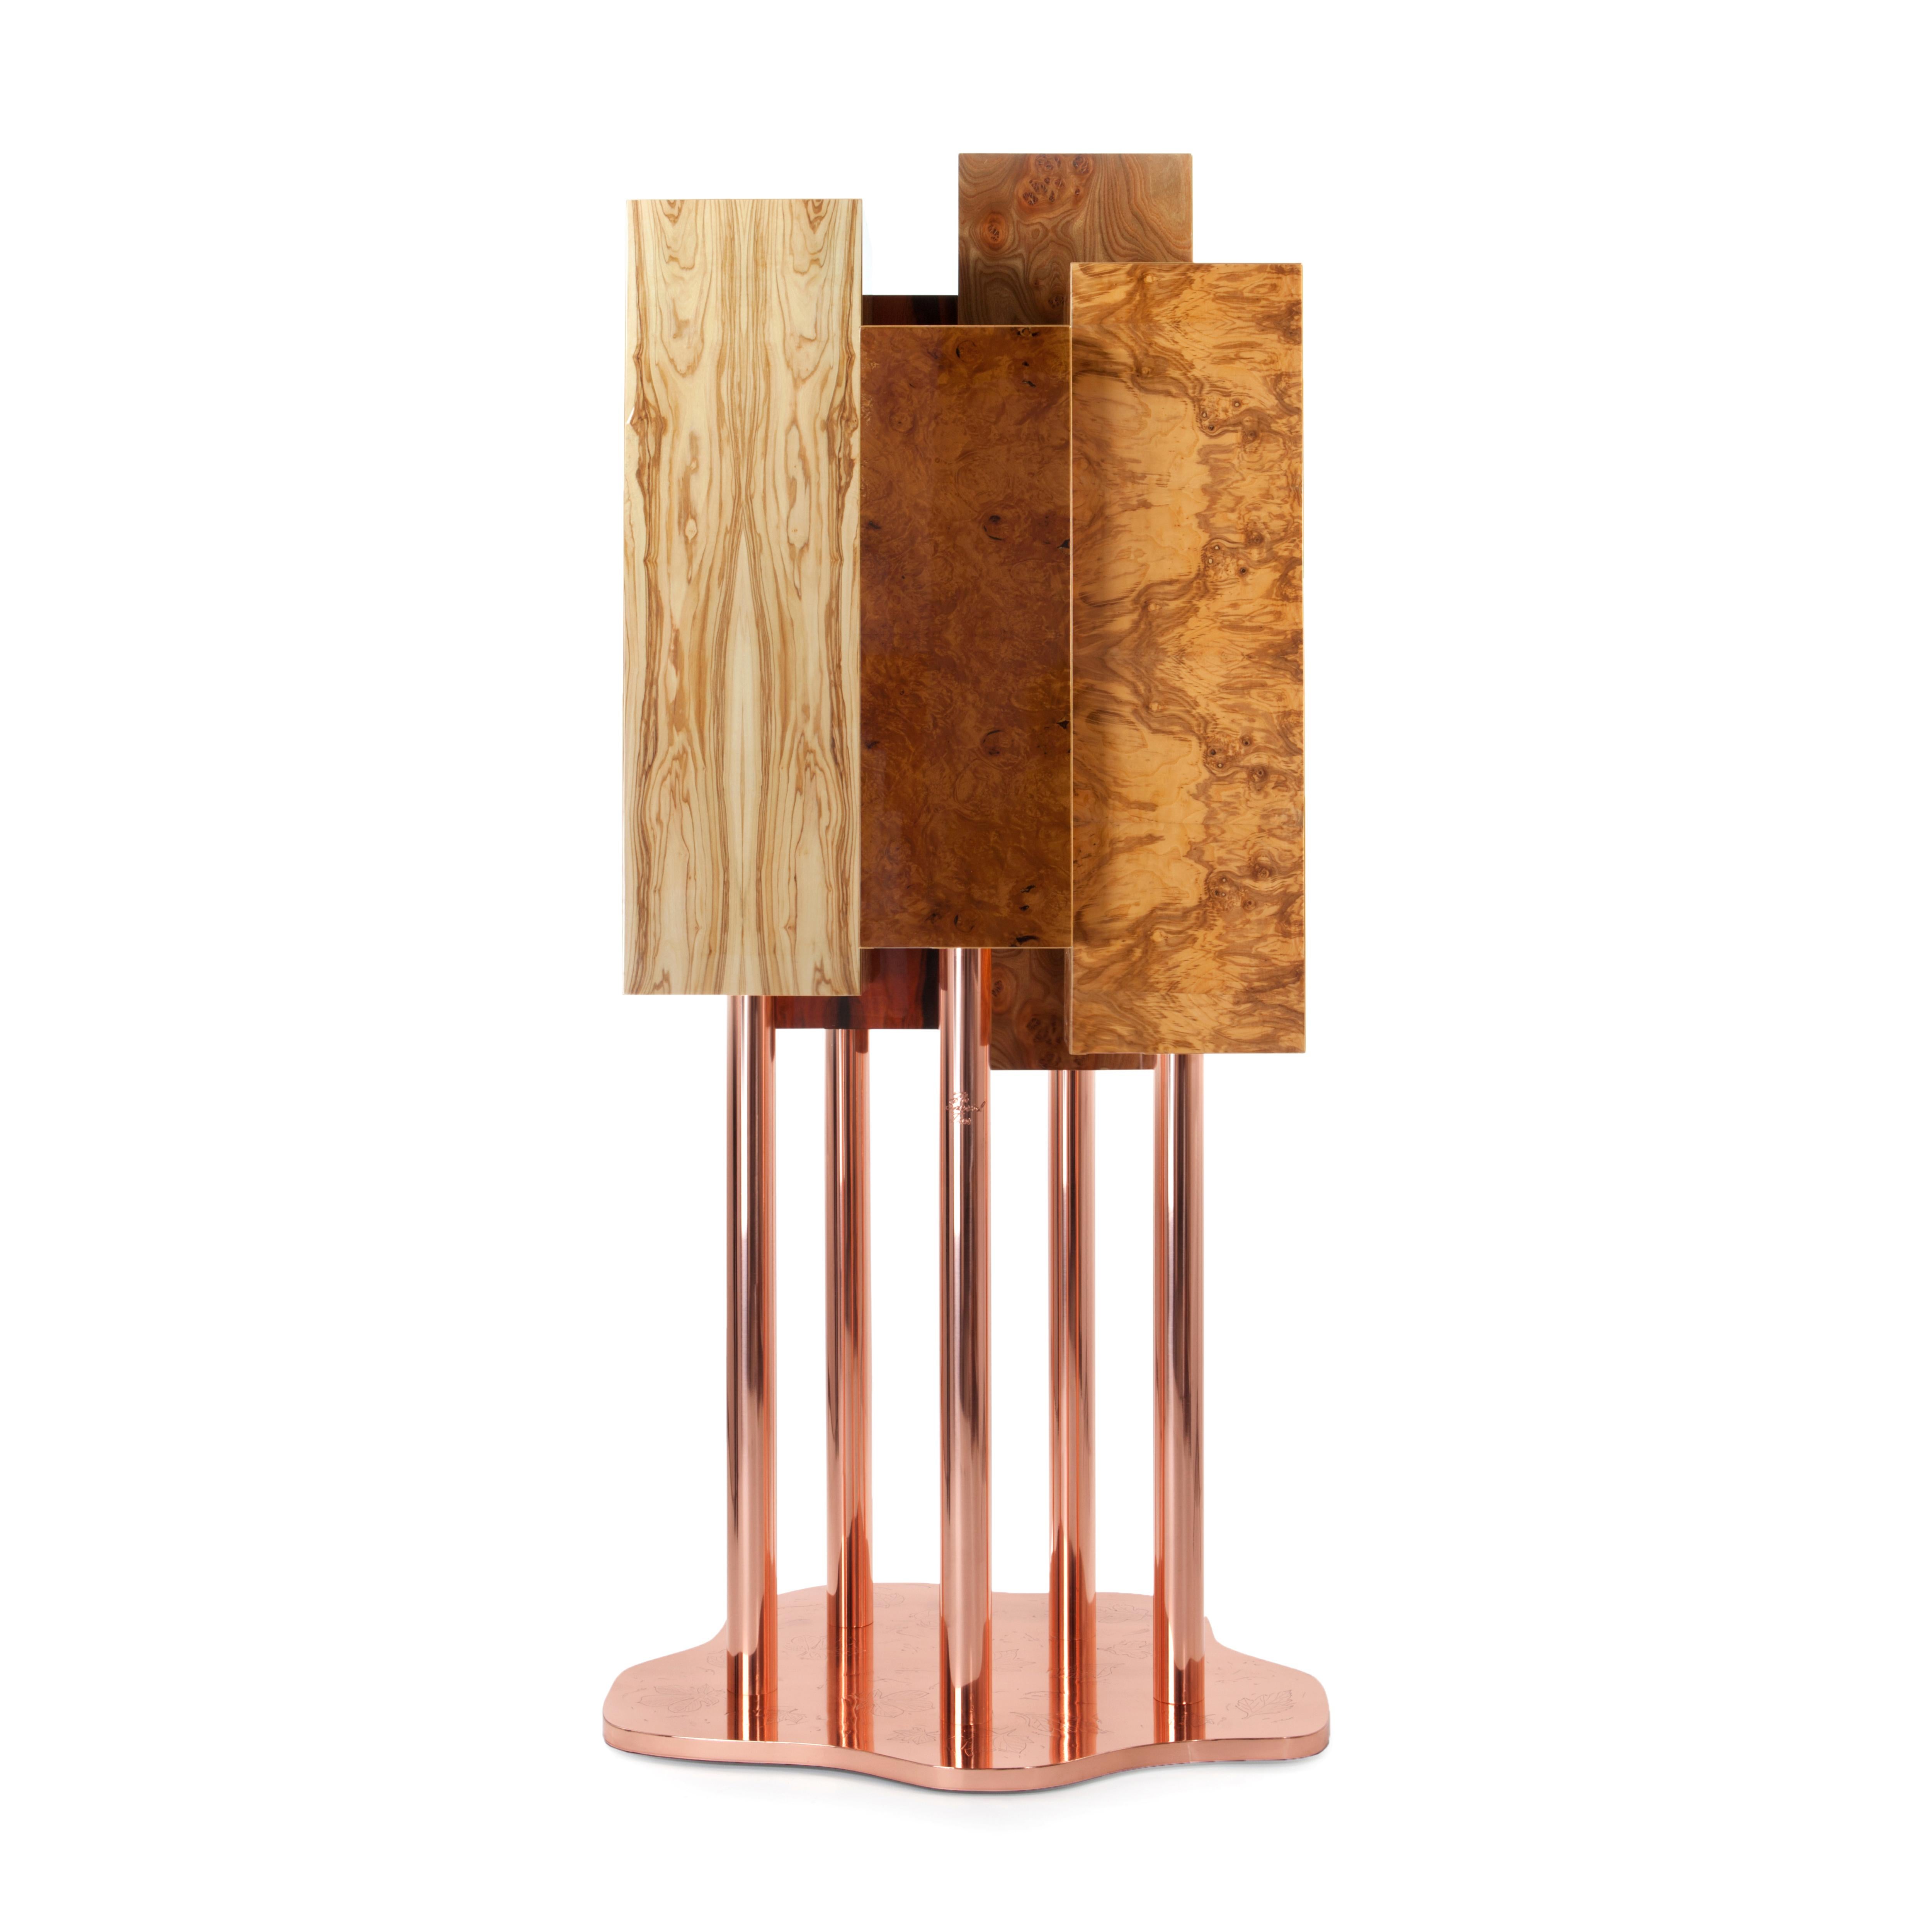 Modern Special Tree Cabinet, Woods and Copper, InsidherLand by Joana Santos Barbosa For Sale